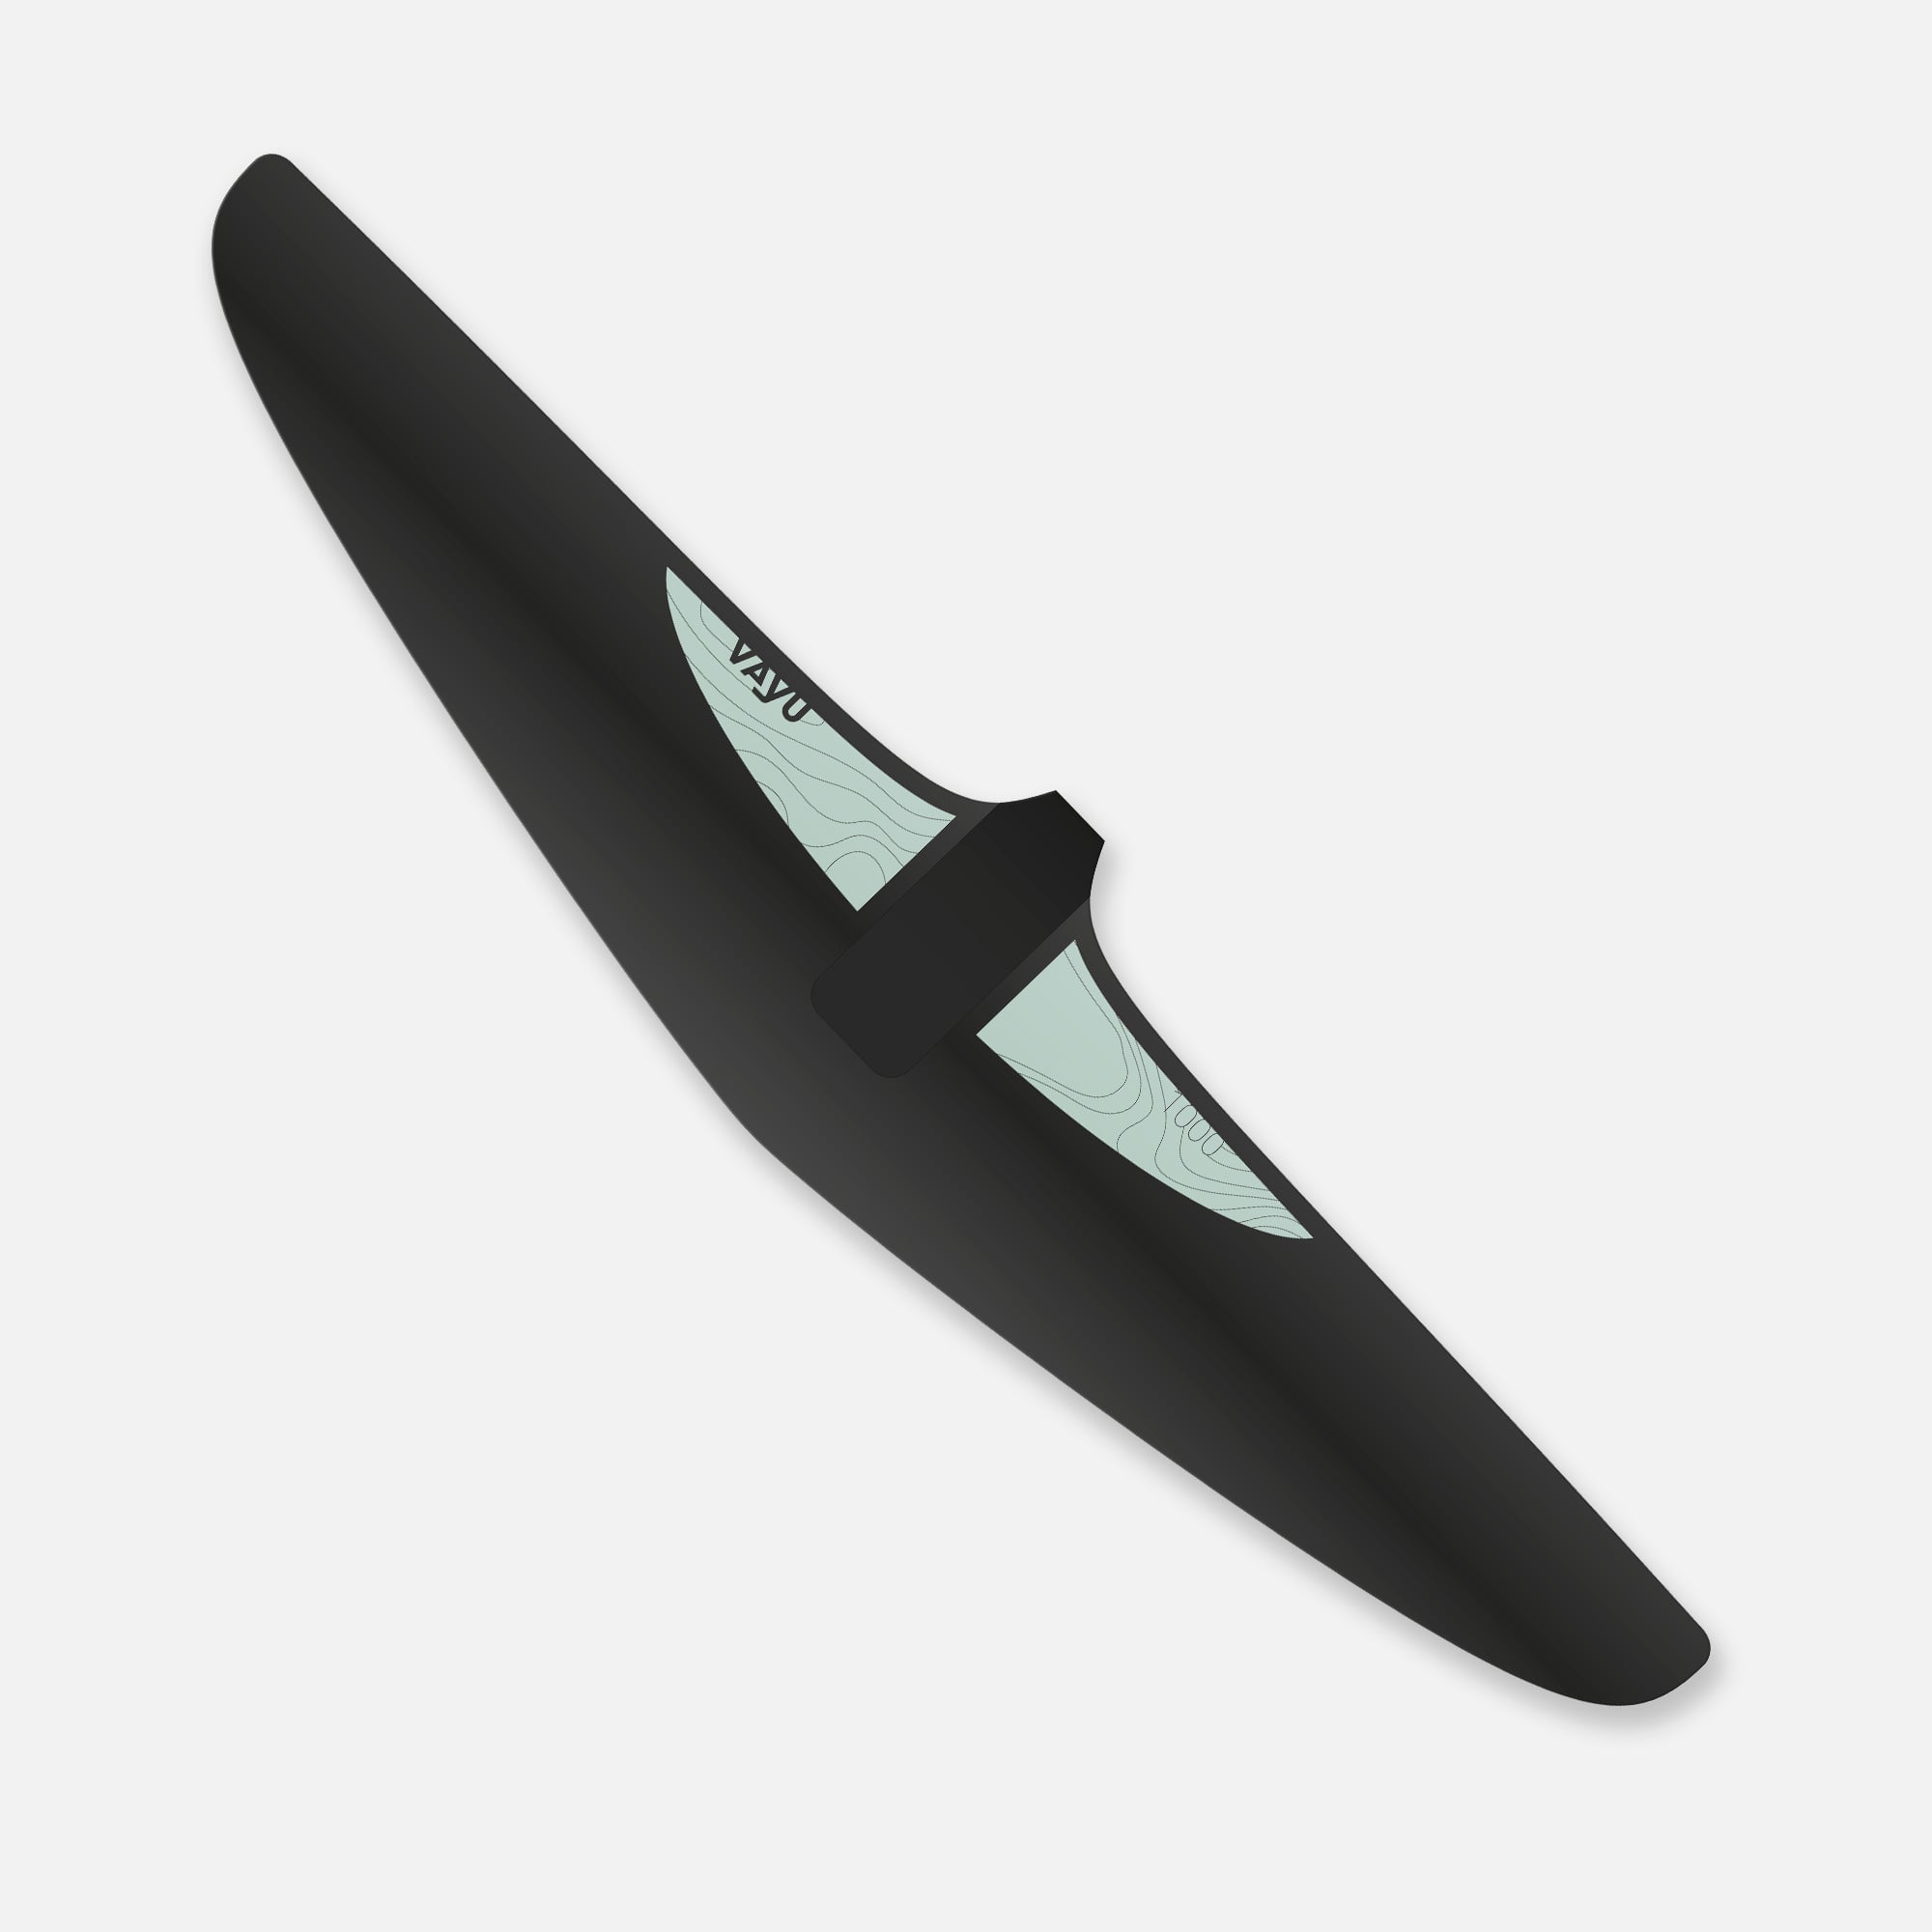 Wingfoilshop wingfoil-shop wingfoiling shop Wing Foiling Vayu Freeride Foil Frontwing High Aspect